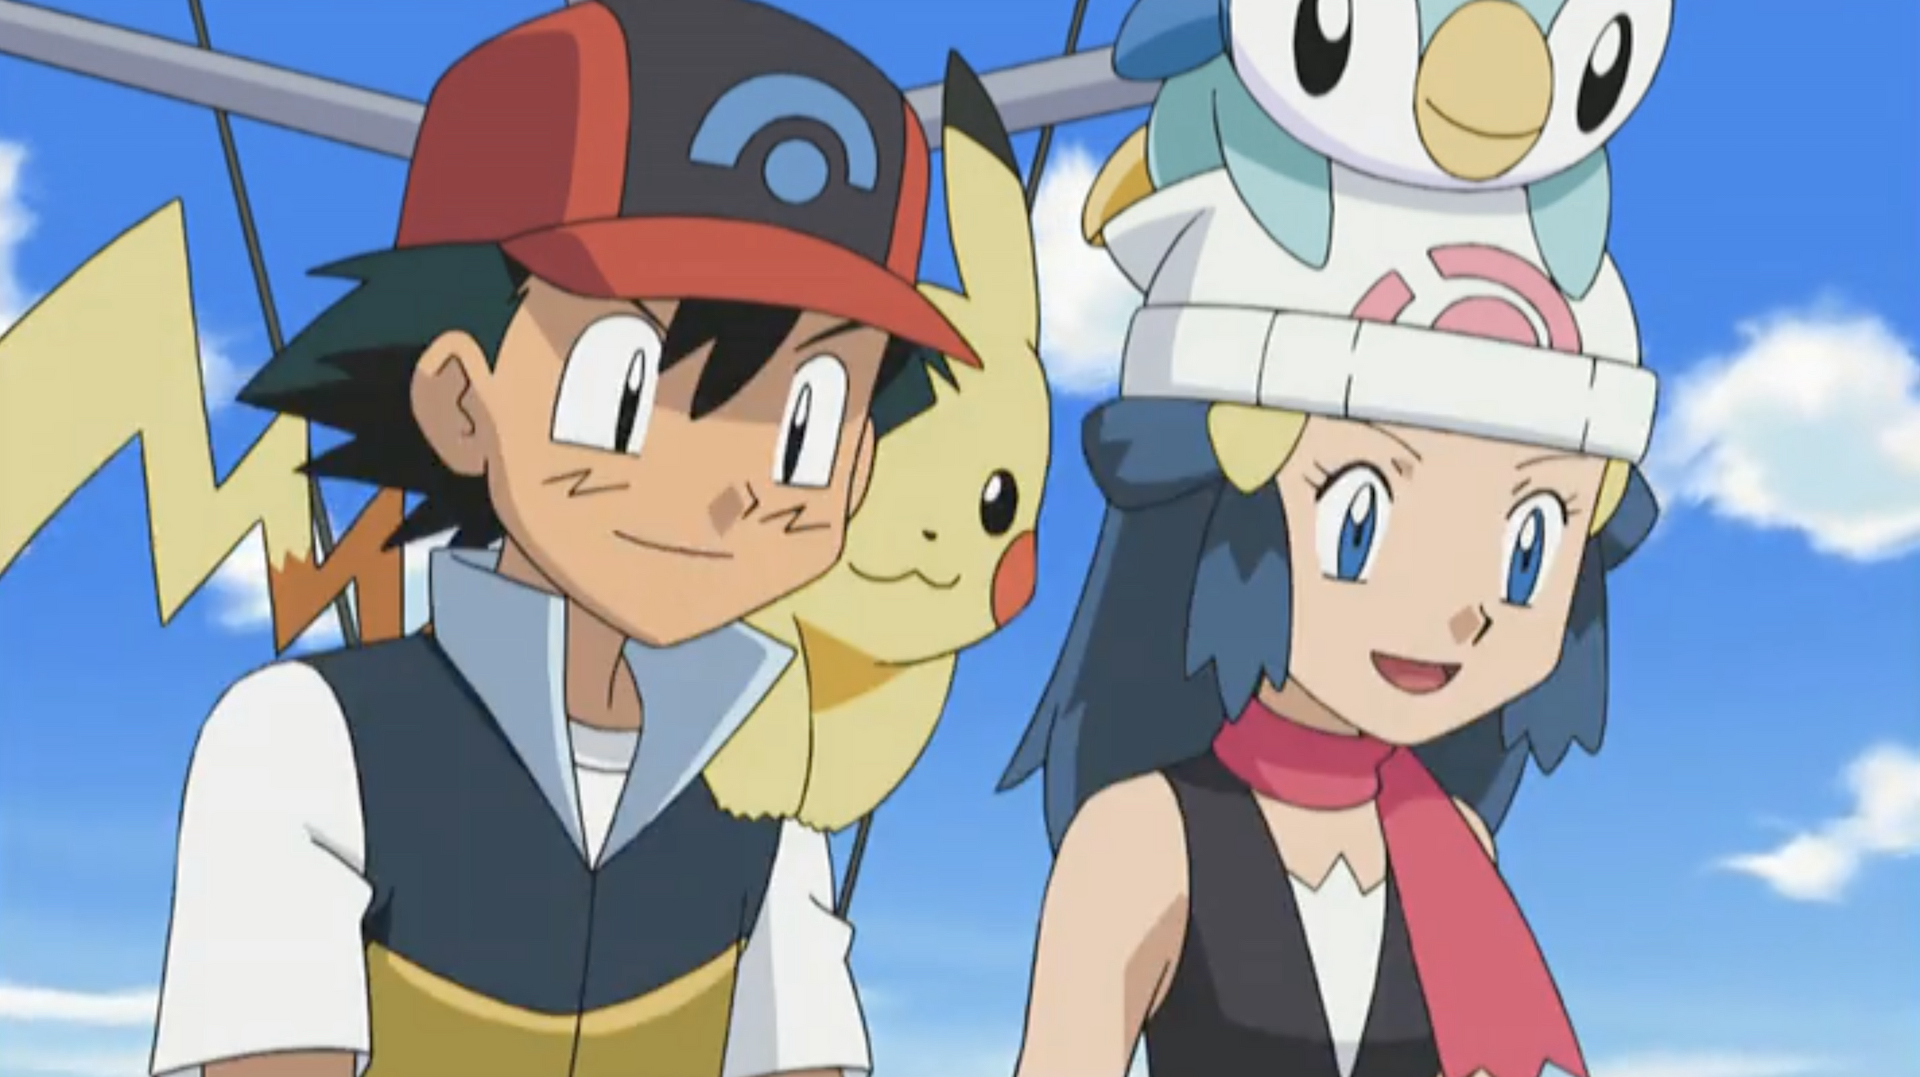 Pokemon Fans Point Out Big Problems With How Ash Used Kingler in the Anime  Series